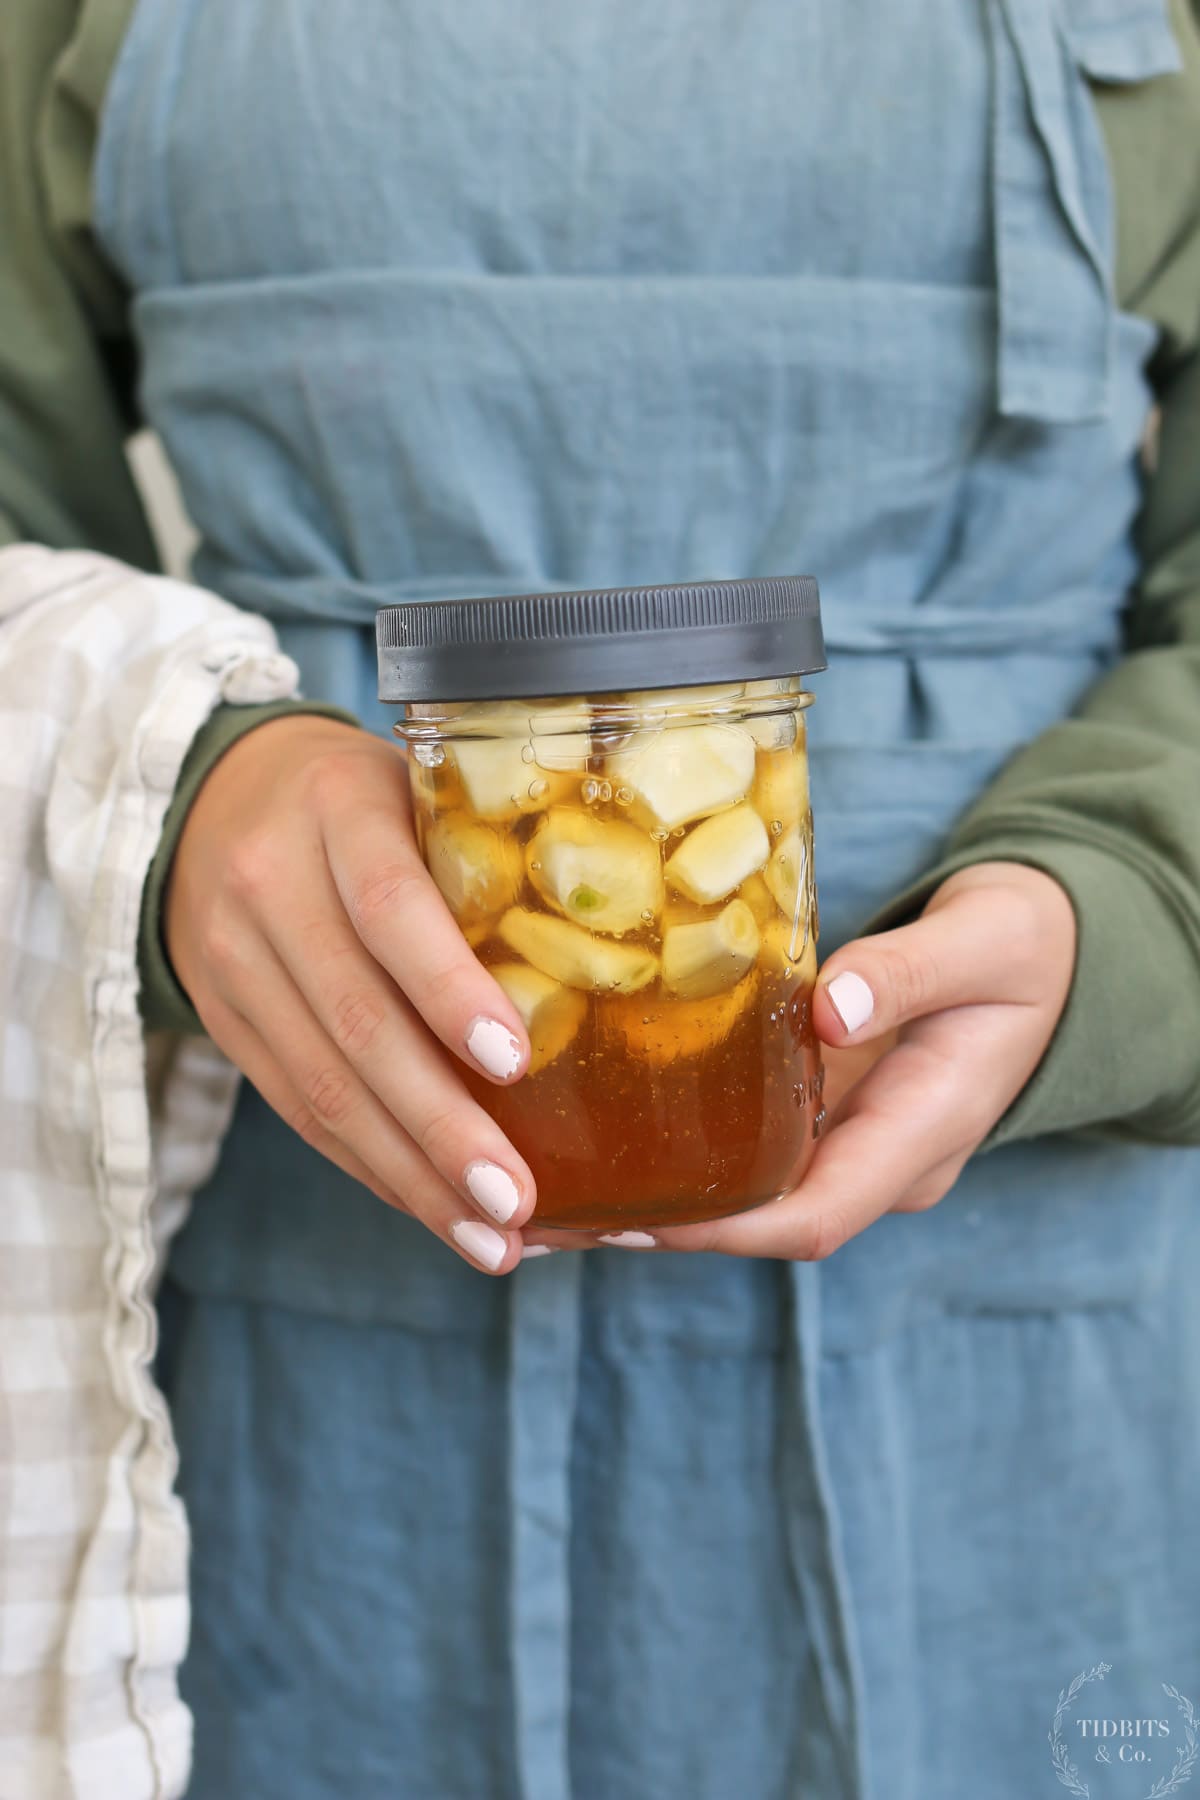 A girls holds a glass jar with immune-boosting garlic infused honey